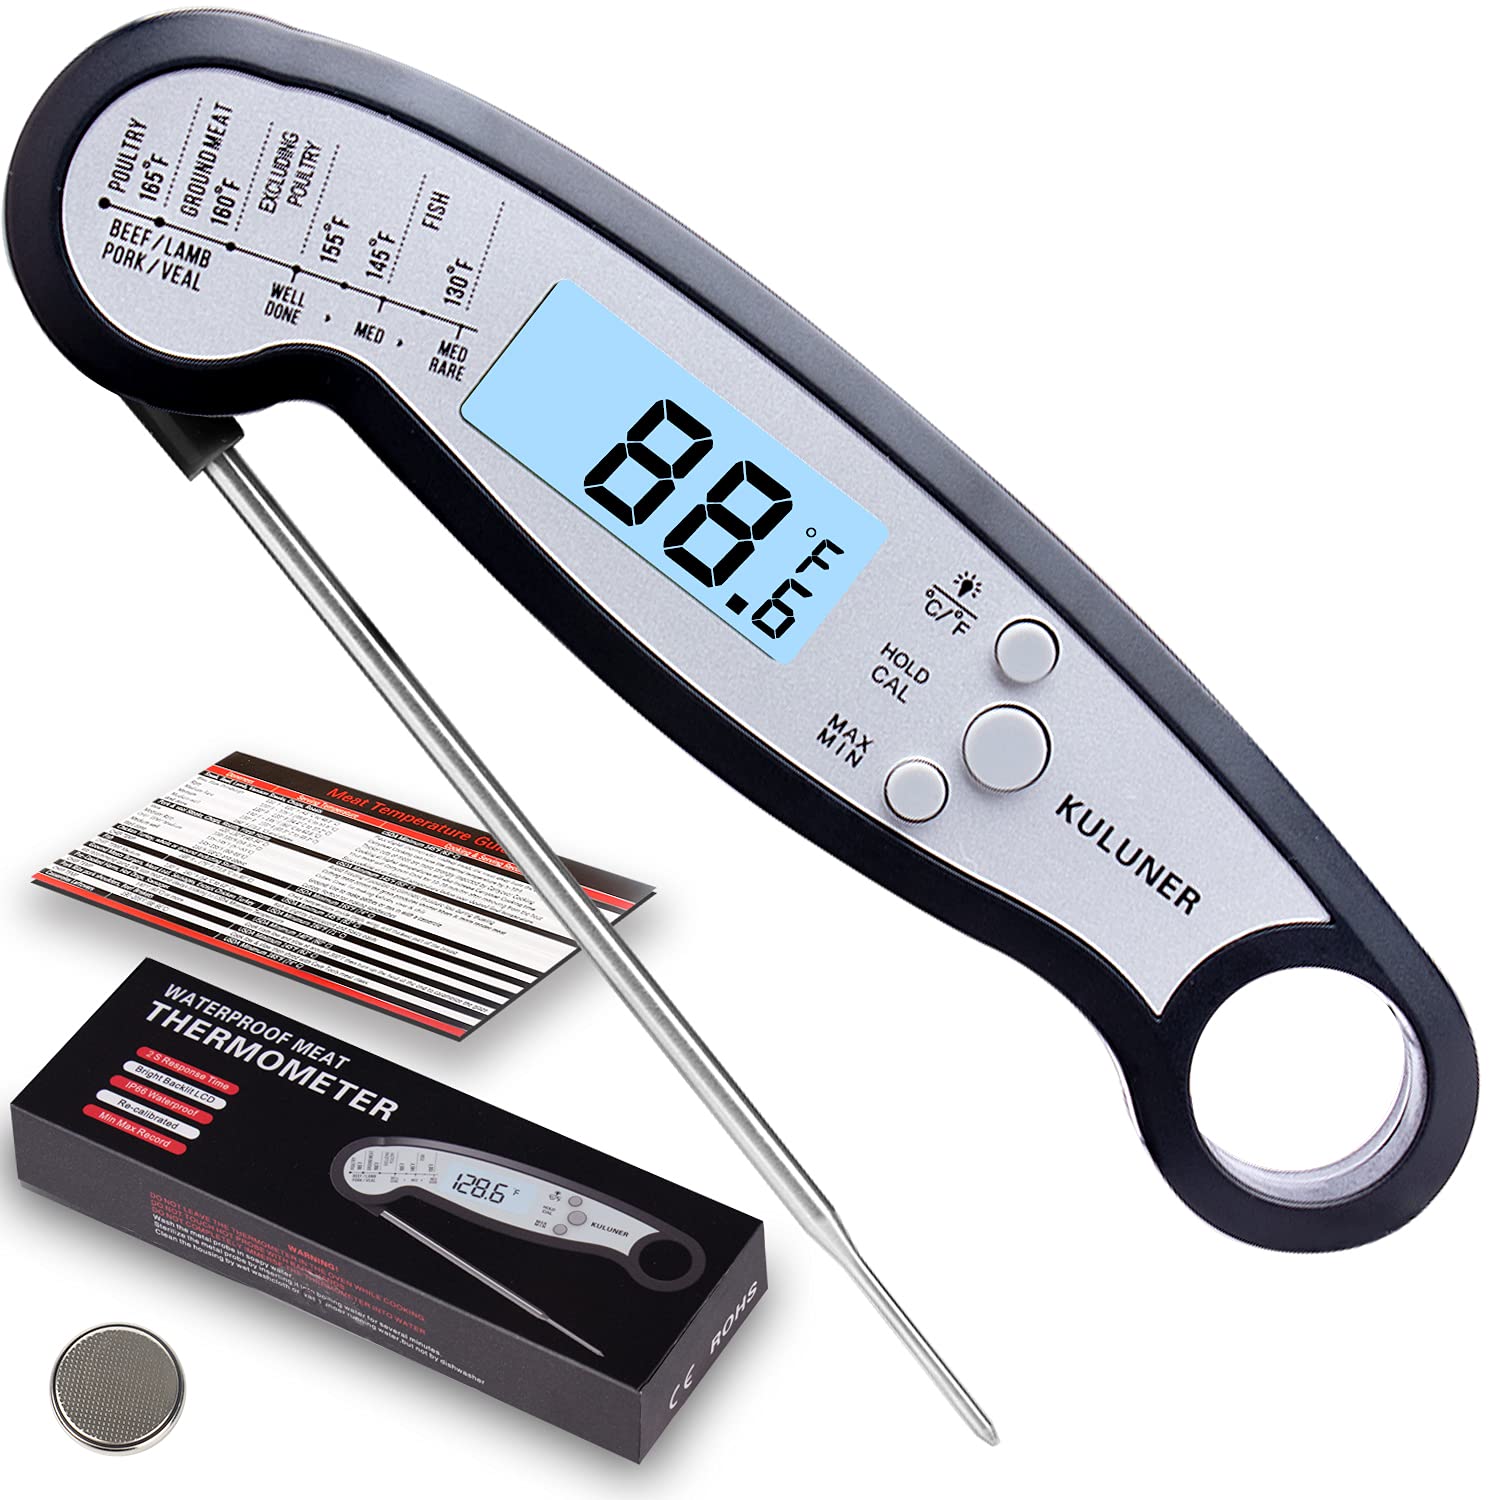 KULUNER Meat Thermometer